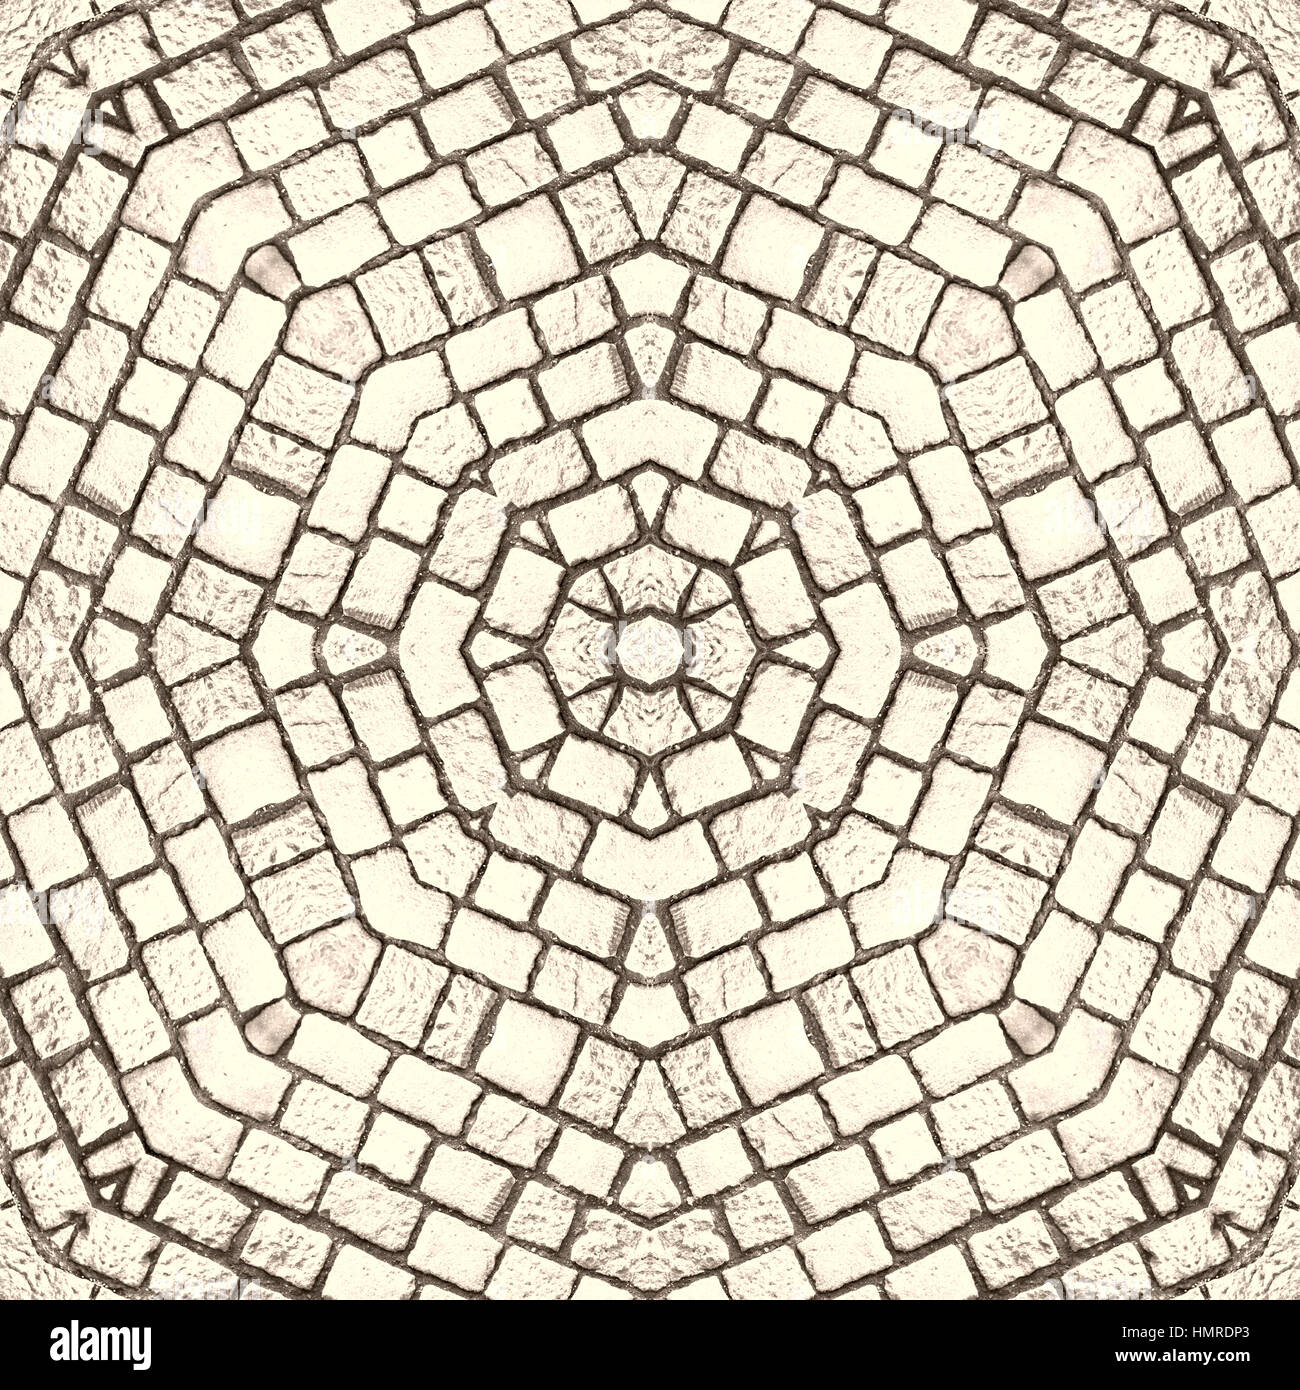 White texture wall seamless background or pattern. Stone pavement or cobblestones. History, fantasy or mystical shapes. Stock Photo